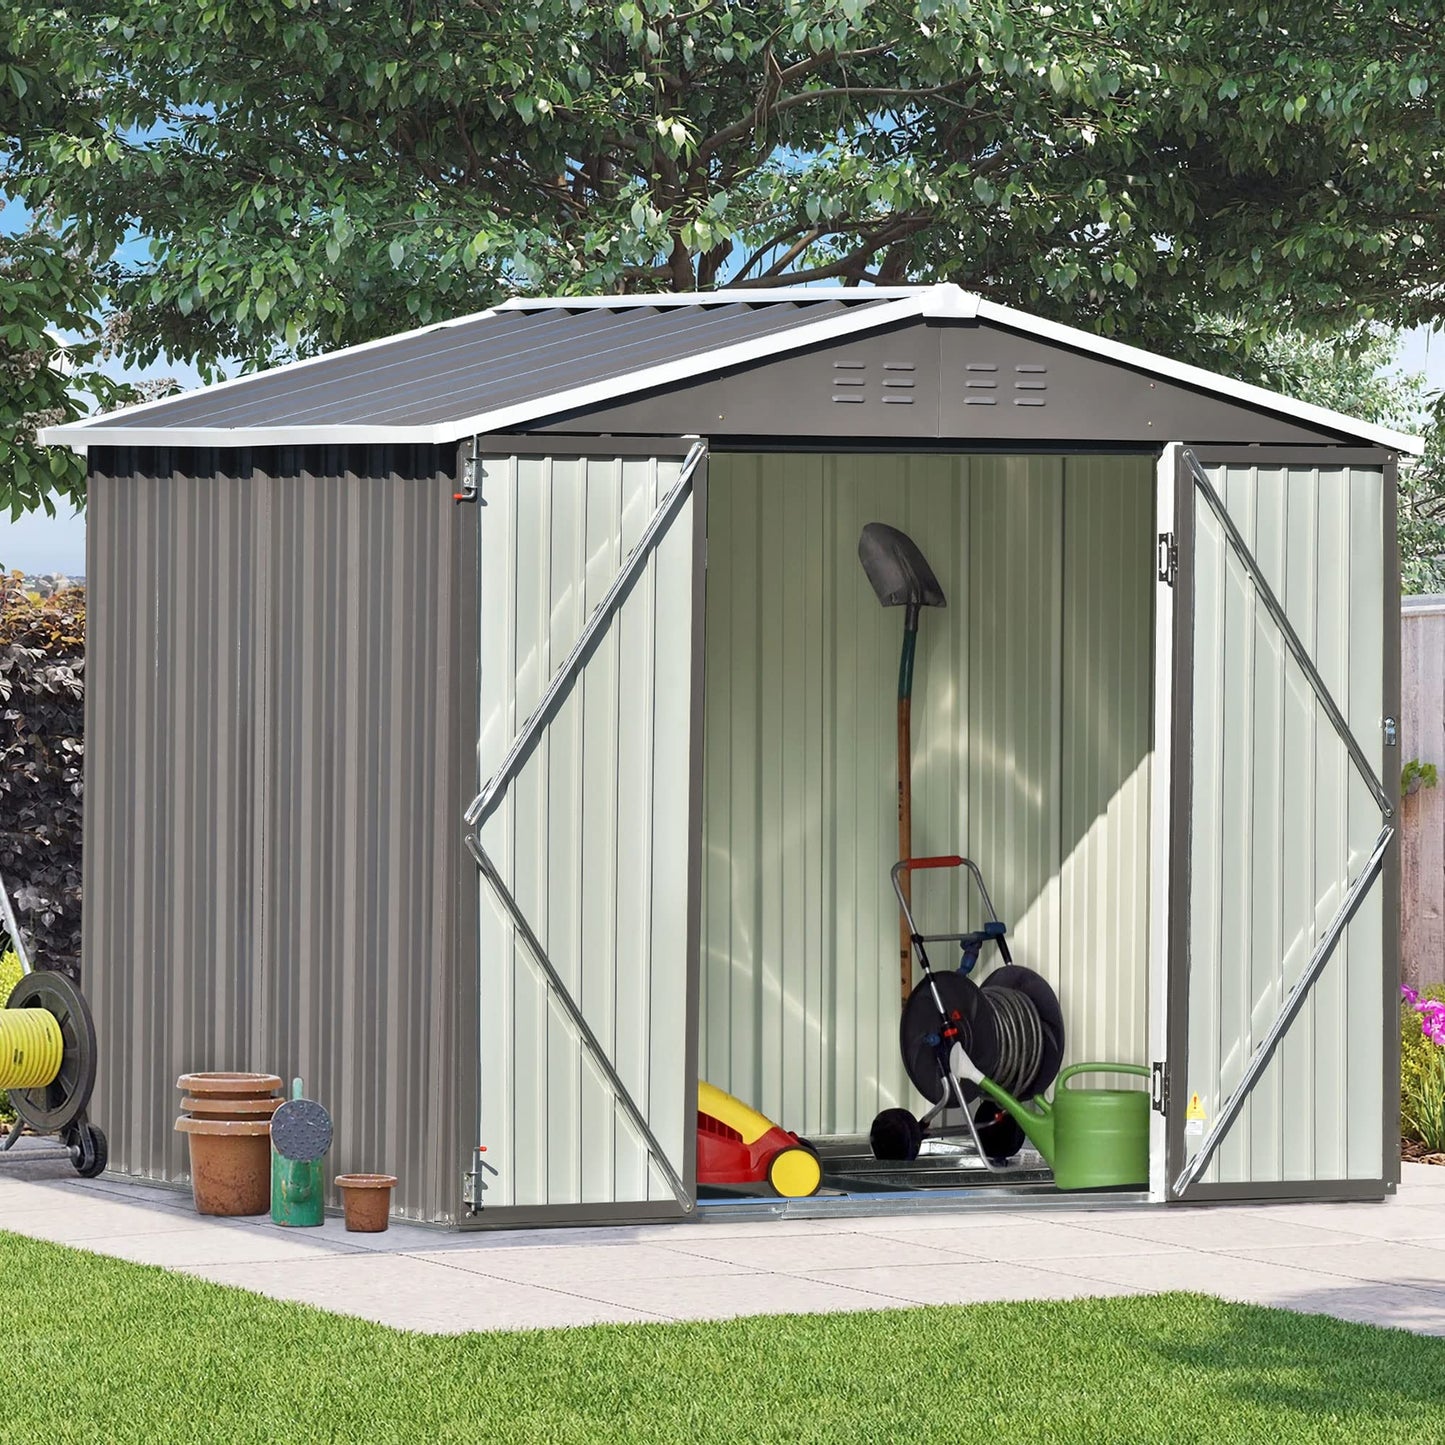 Tensun Patio 7.8' x 6.4' x 6' Bike Shed Garden Shed with Ground Base, Metal Storage Shed with Lockable Doors, Tool Cabinet with Vents and Foundation Frame for Backyard, Lawn, Garden, Gray Gray-2